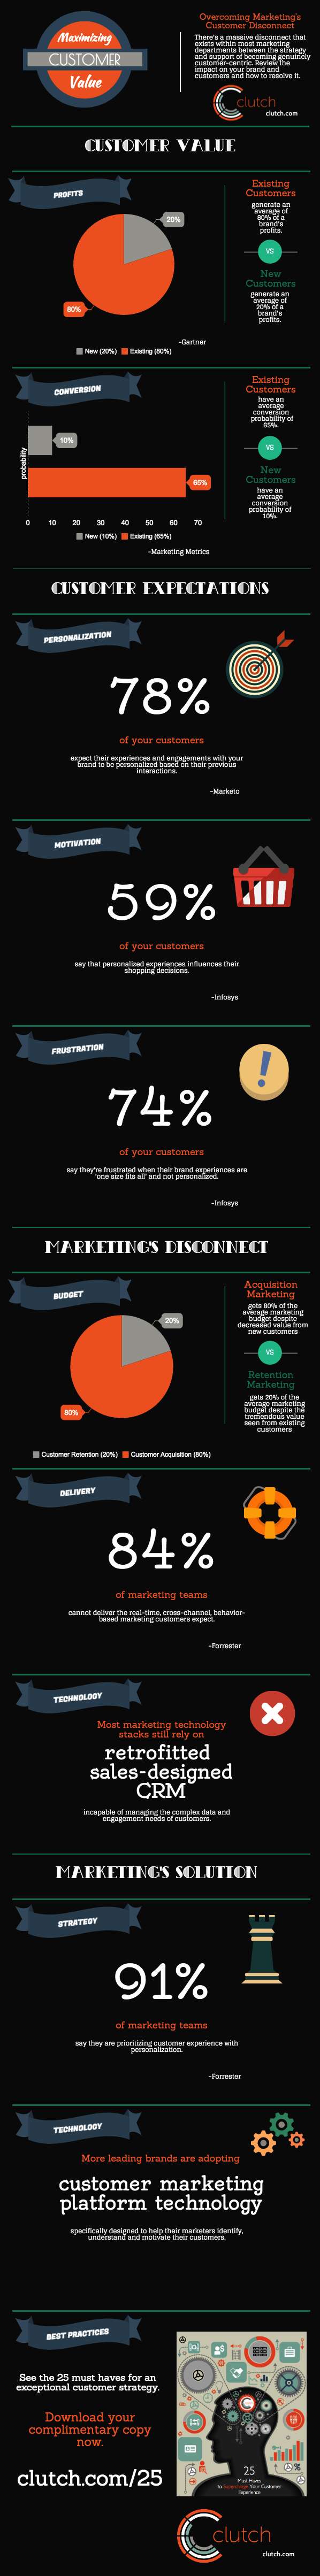 2016-4-1Clutch Customer Value Infographic